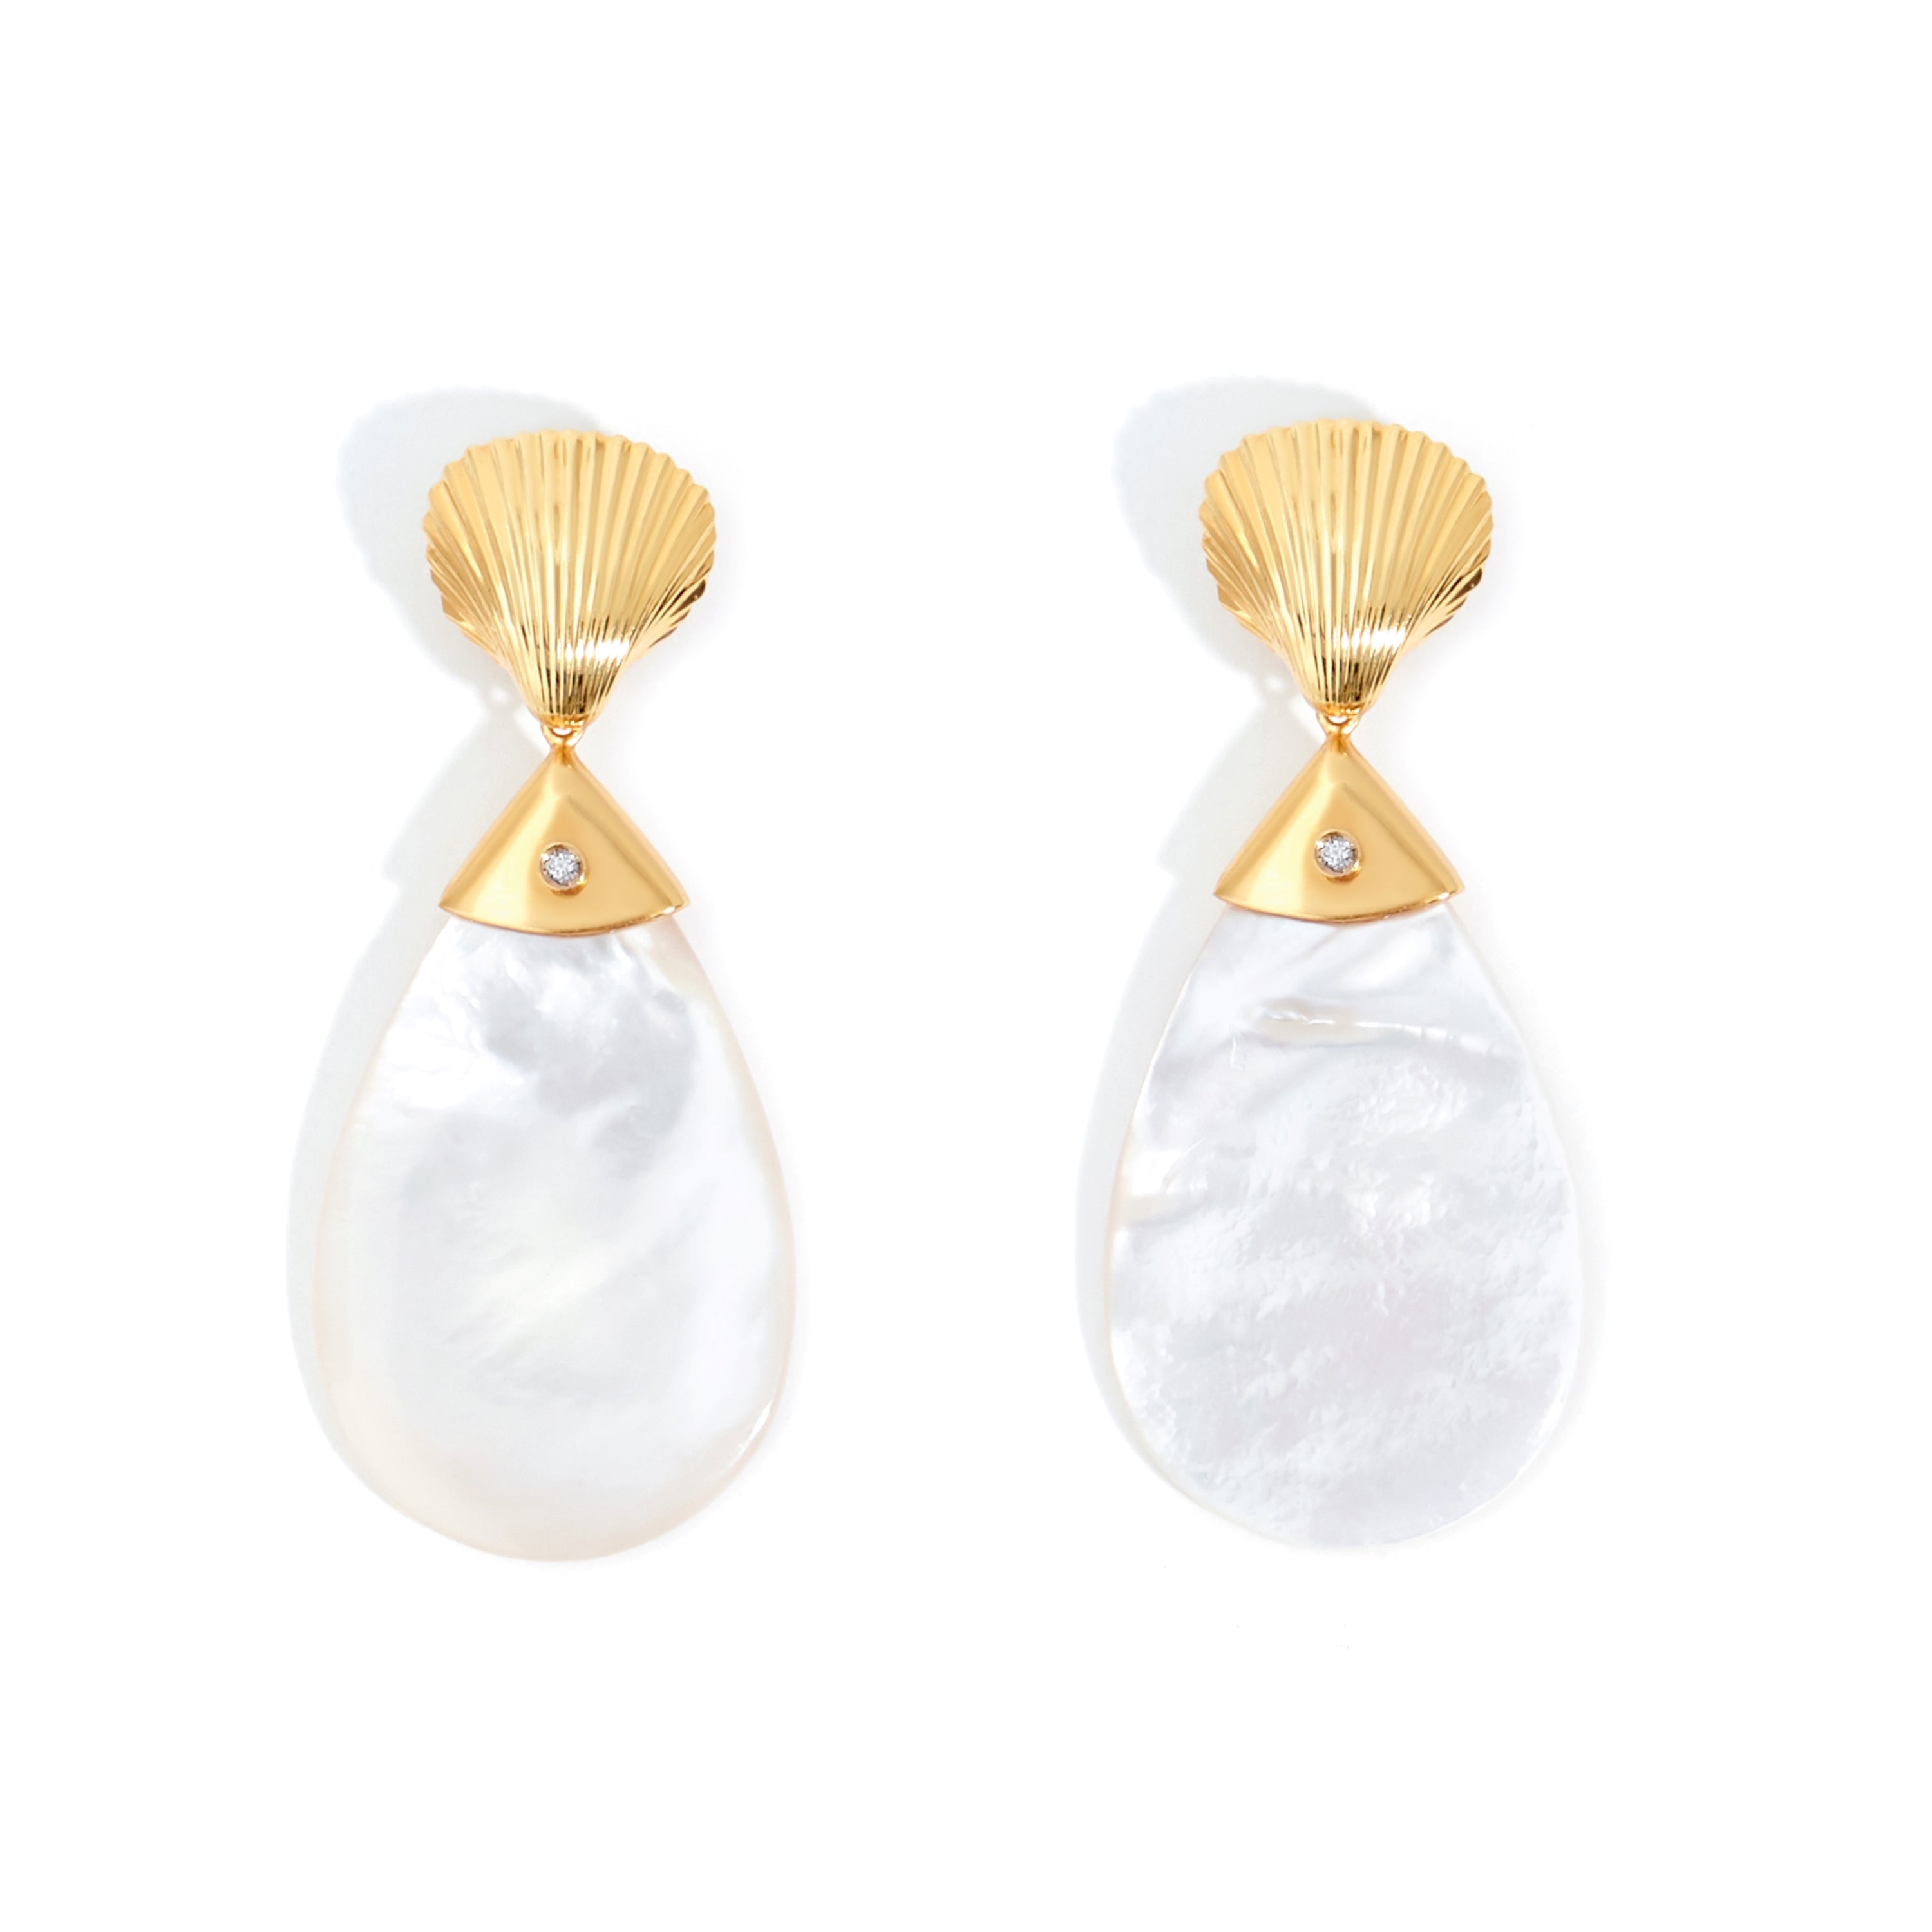 MADREPERLA EARRING IN 18K YELLOW GOLD PLATED SILVER WITH MOTHER OF PEARL AND DIAMOND